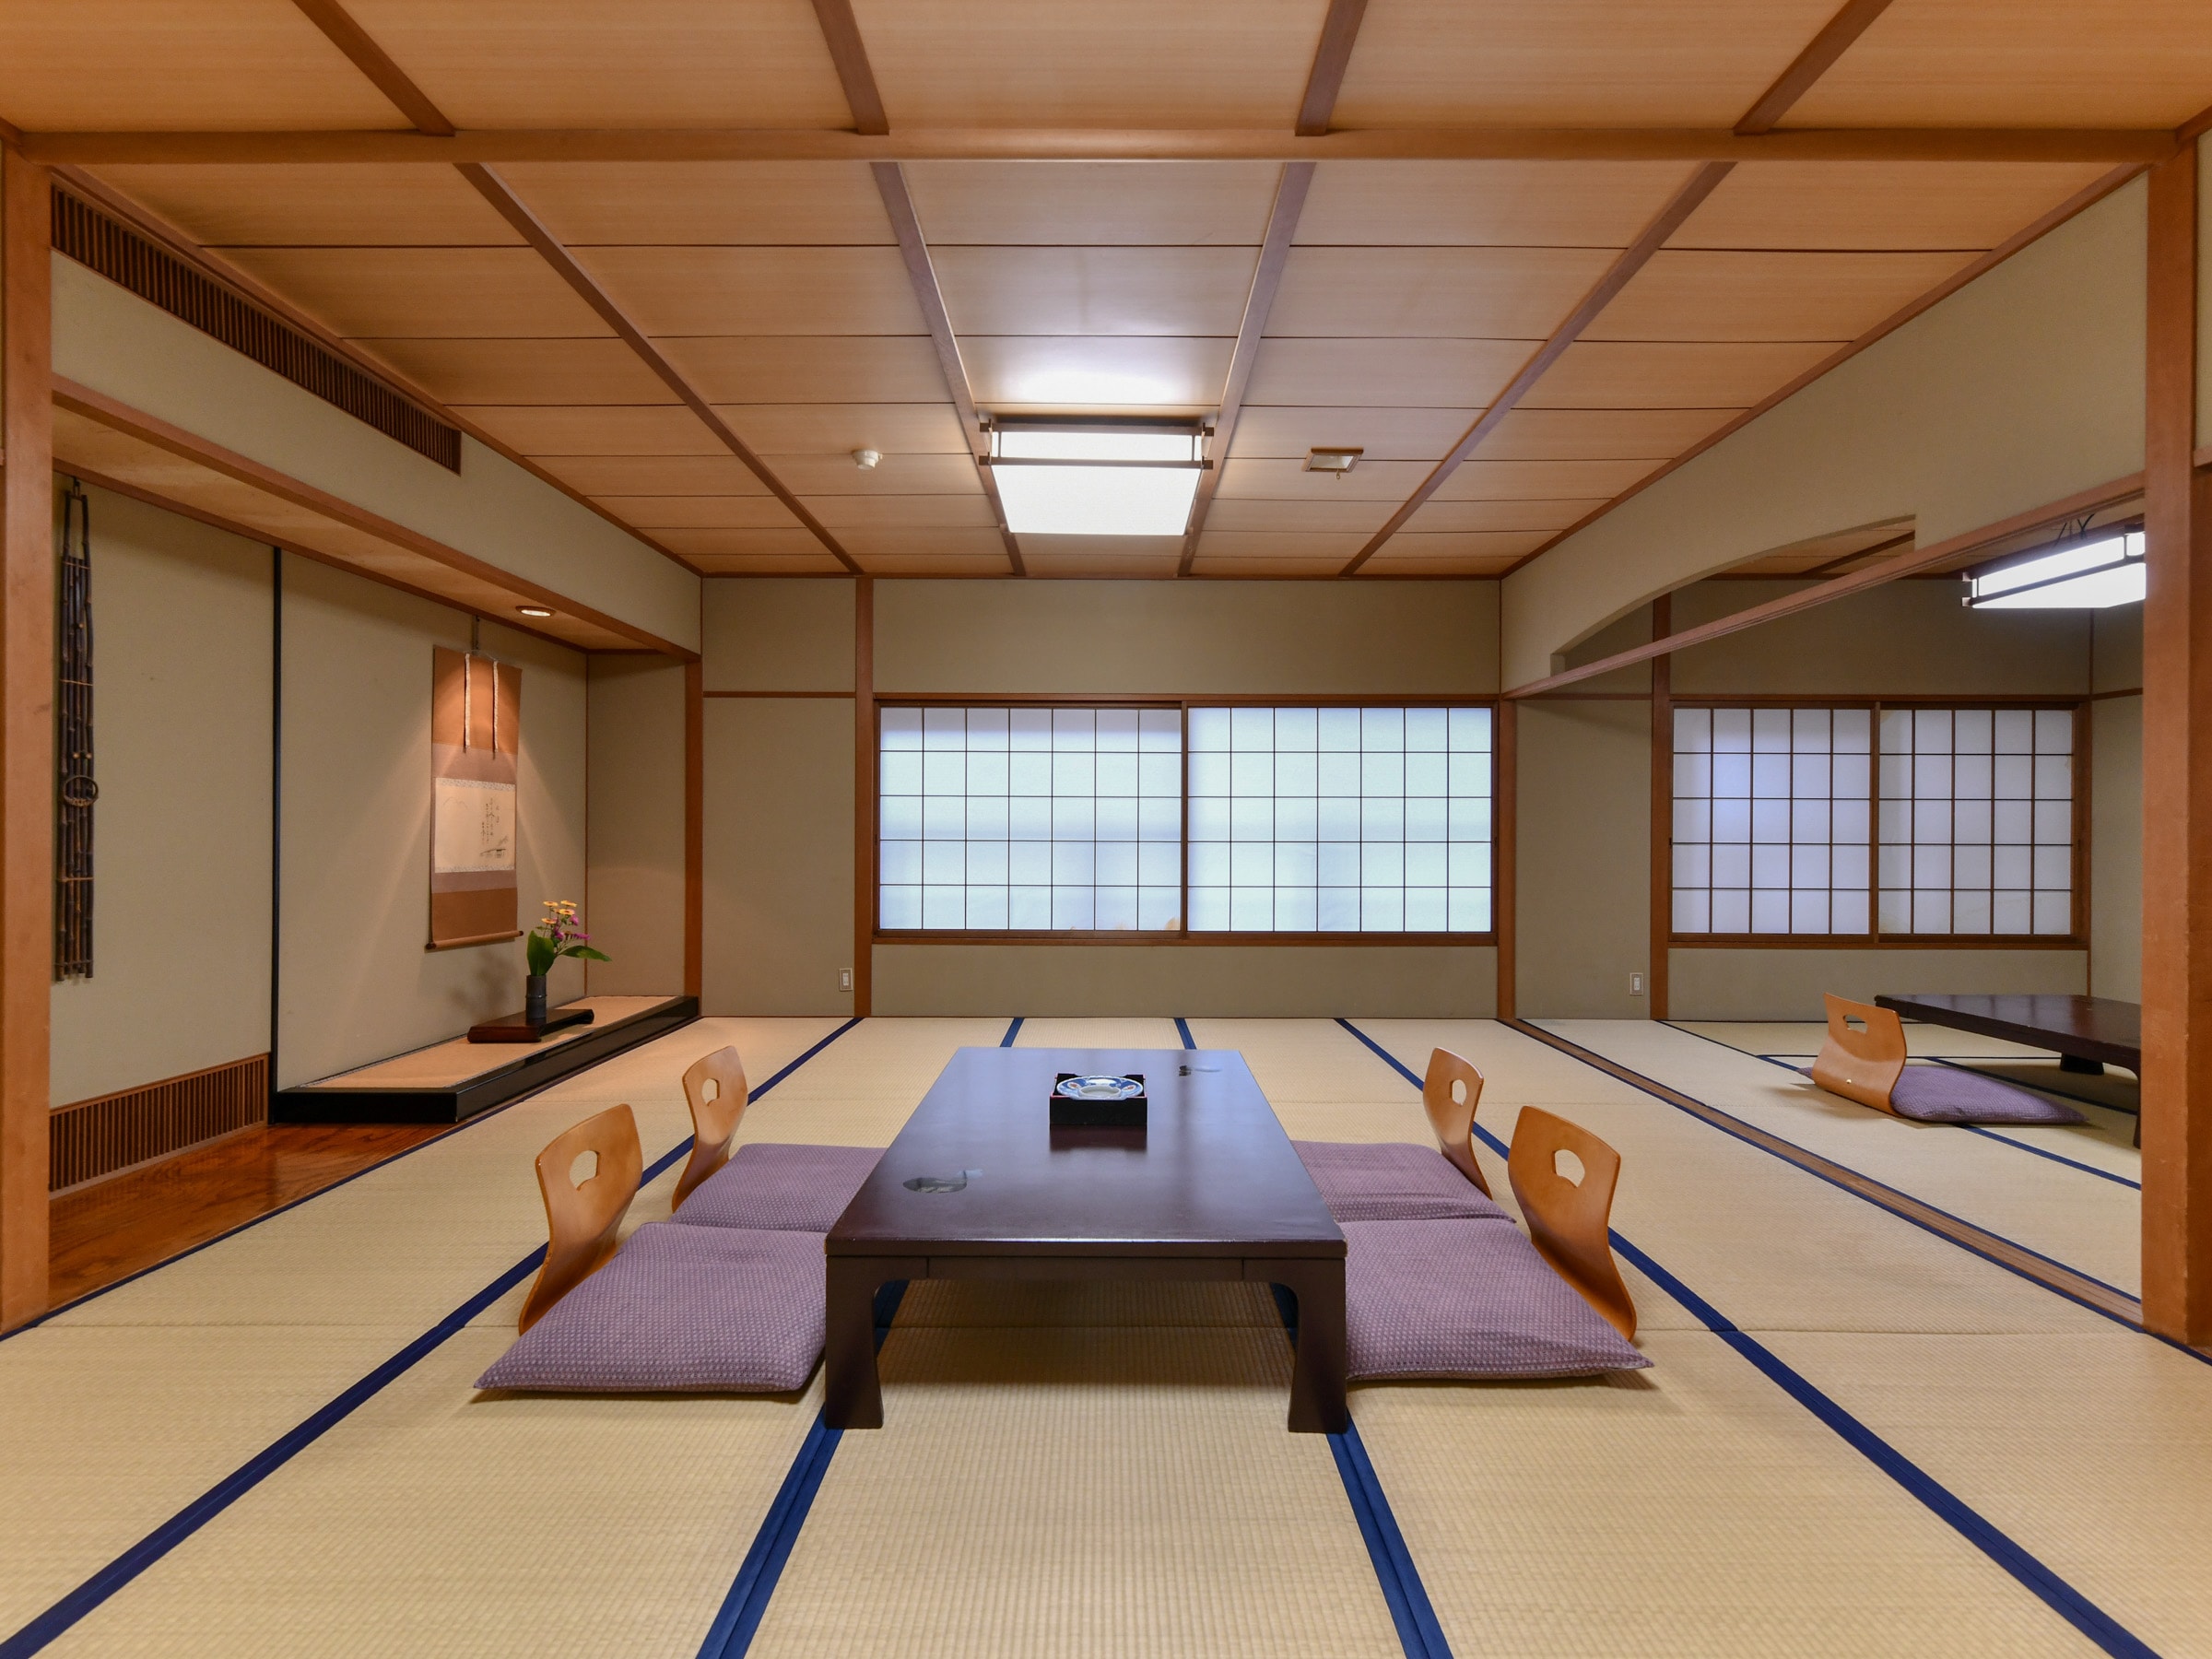 [Toyoraku] Japanese-style room 17.5 tatami mats + 8 tatami mats that can be used extensively by family and friends